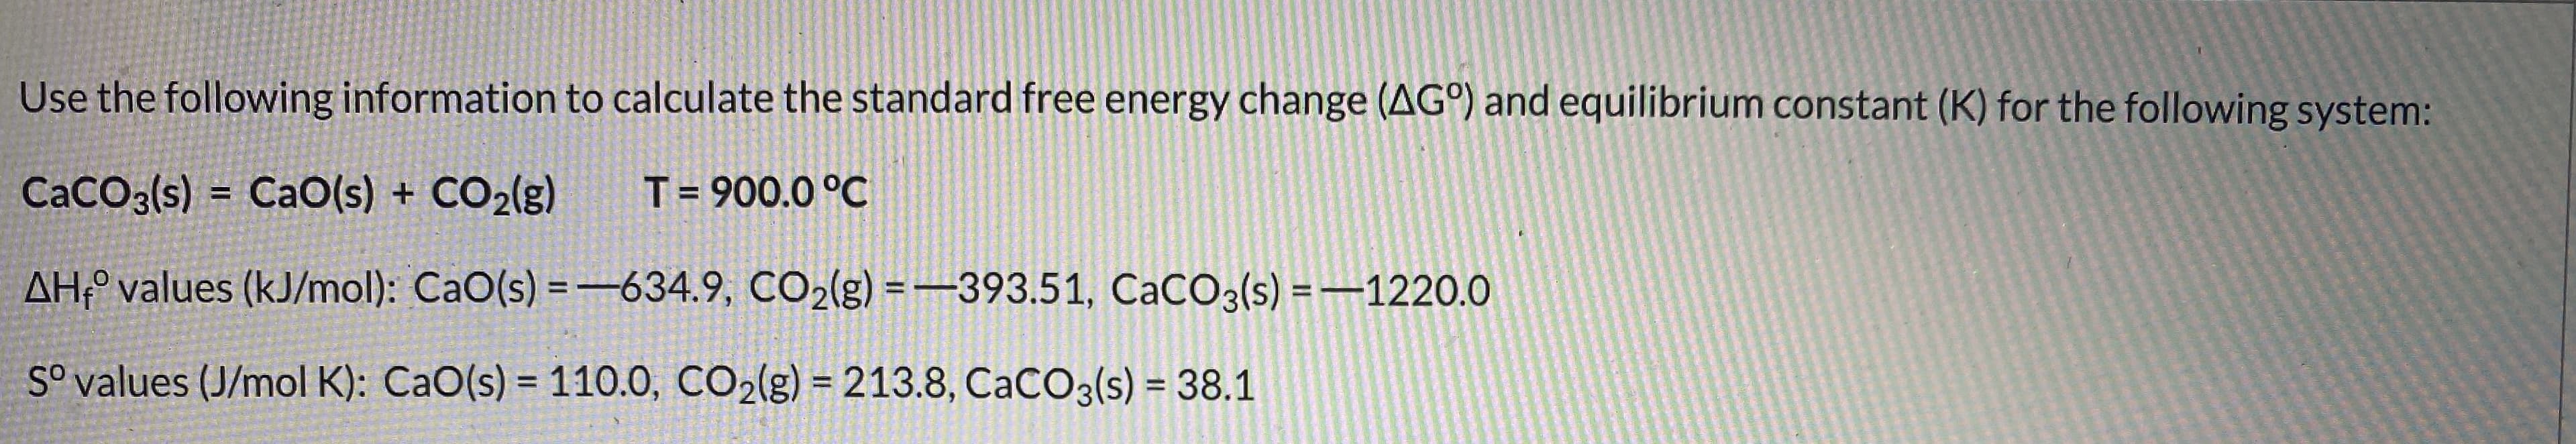 Use the following information to calculate the standard free energy change (AG°) and equilibrium constant (K) for the following system:
CaCO3(s) = CaO(s) + CO2(g)
T= 900.0 °C
AH;° values (kJ/mol): CaO(s) = -634.9, CO2(g) = -393.51, CaCO3(s) =–1220.0
%3D
S° values (J/mol K): CaO(s) = 110.0, CO2(g) = 213.8, CACO3(s) = 38.1
%3D
%3D
%3D
